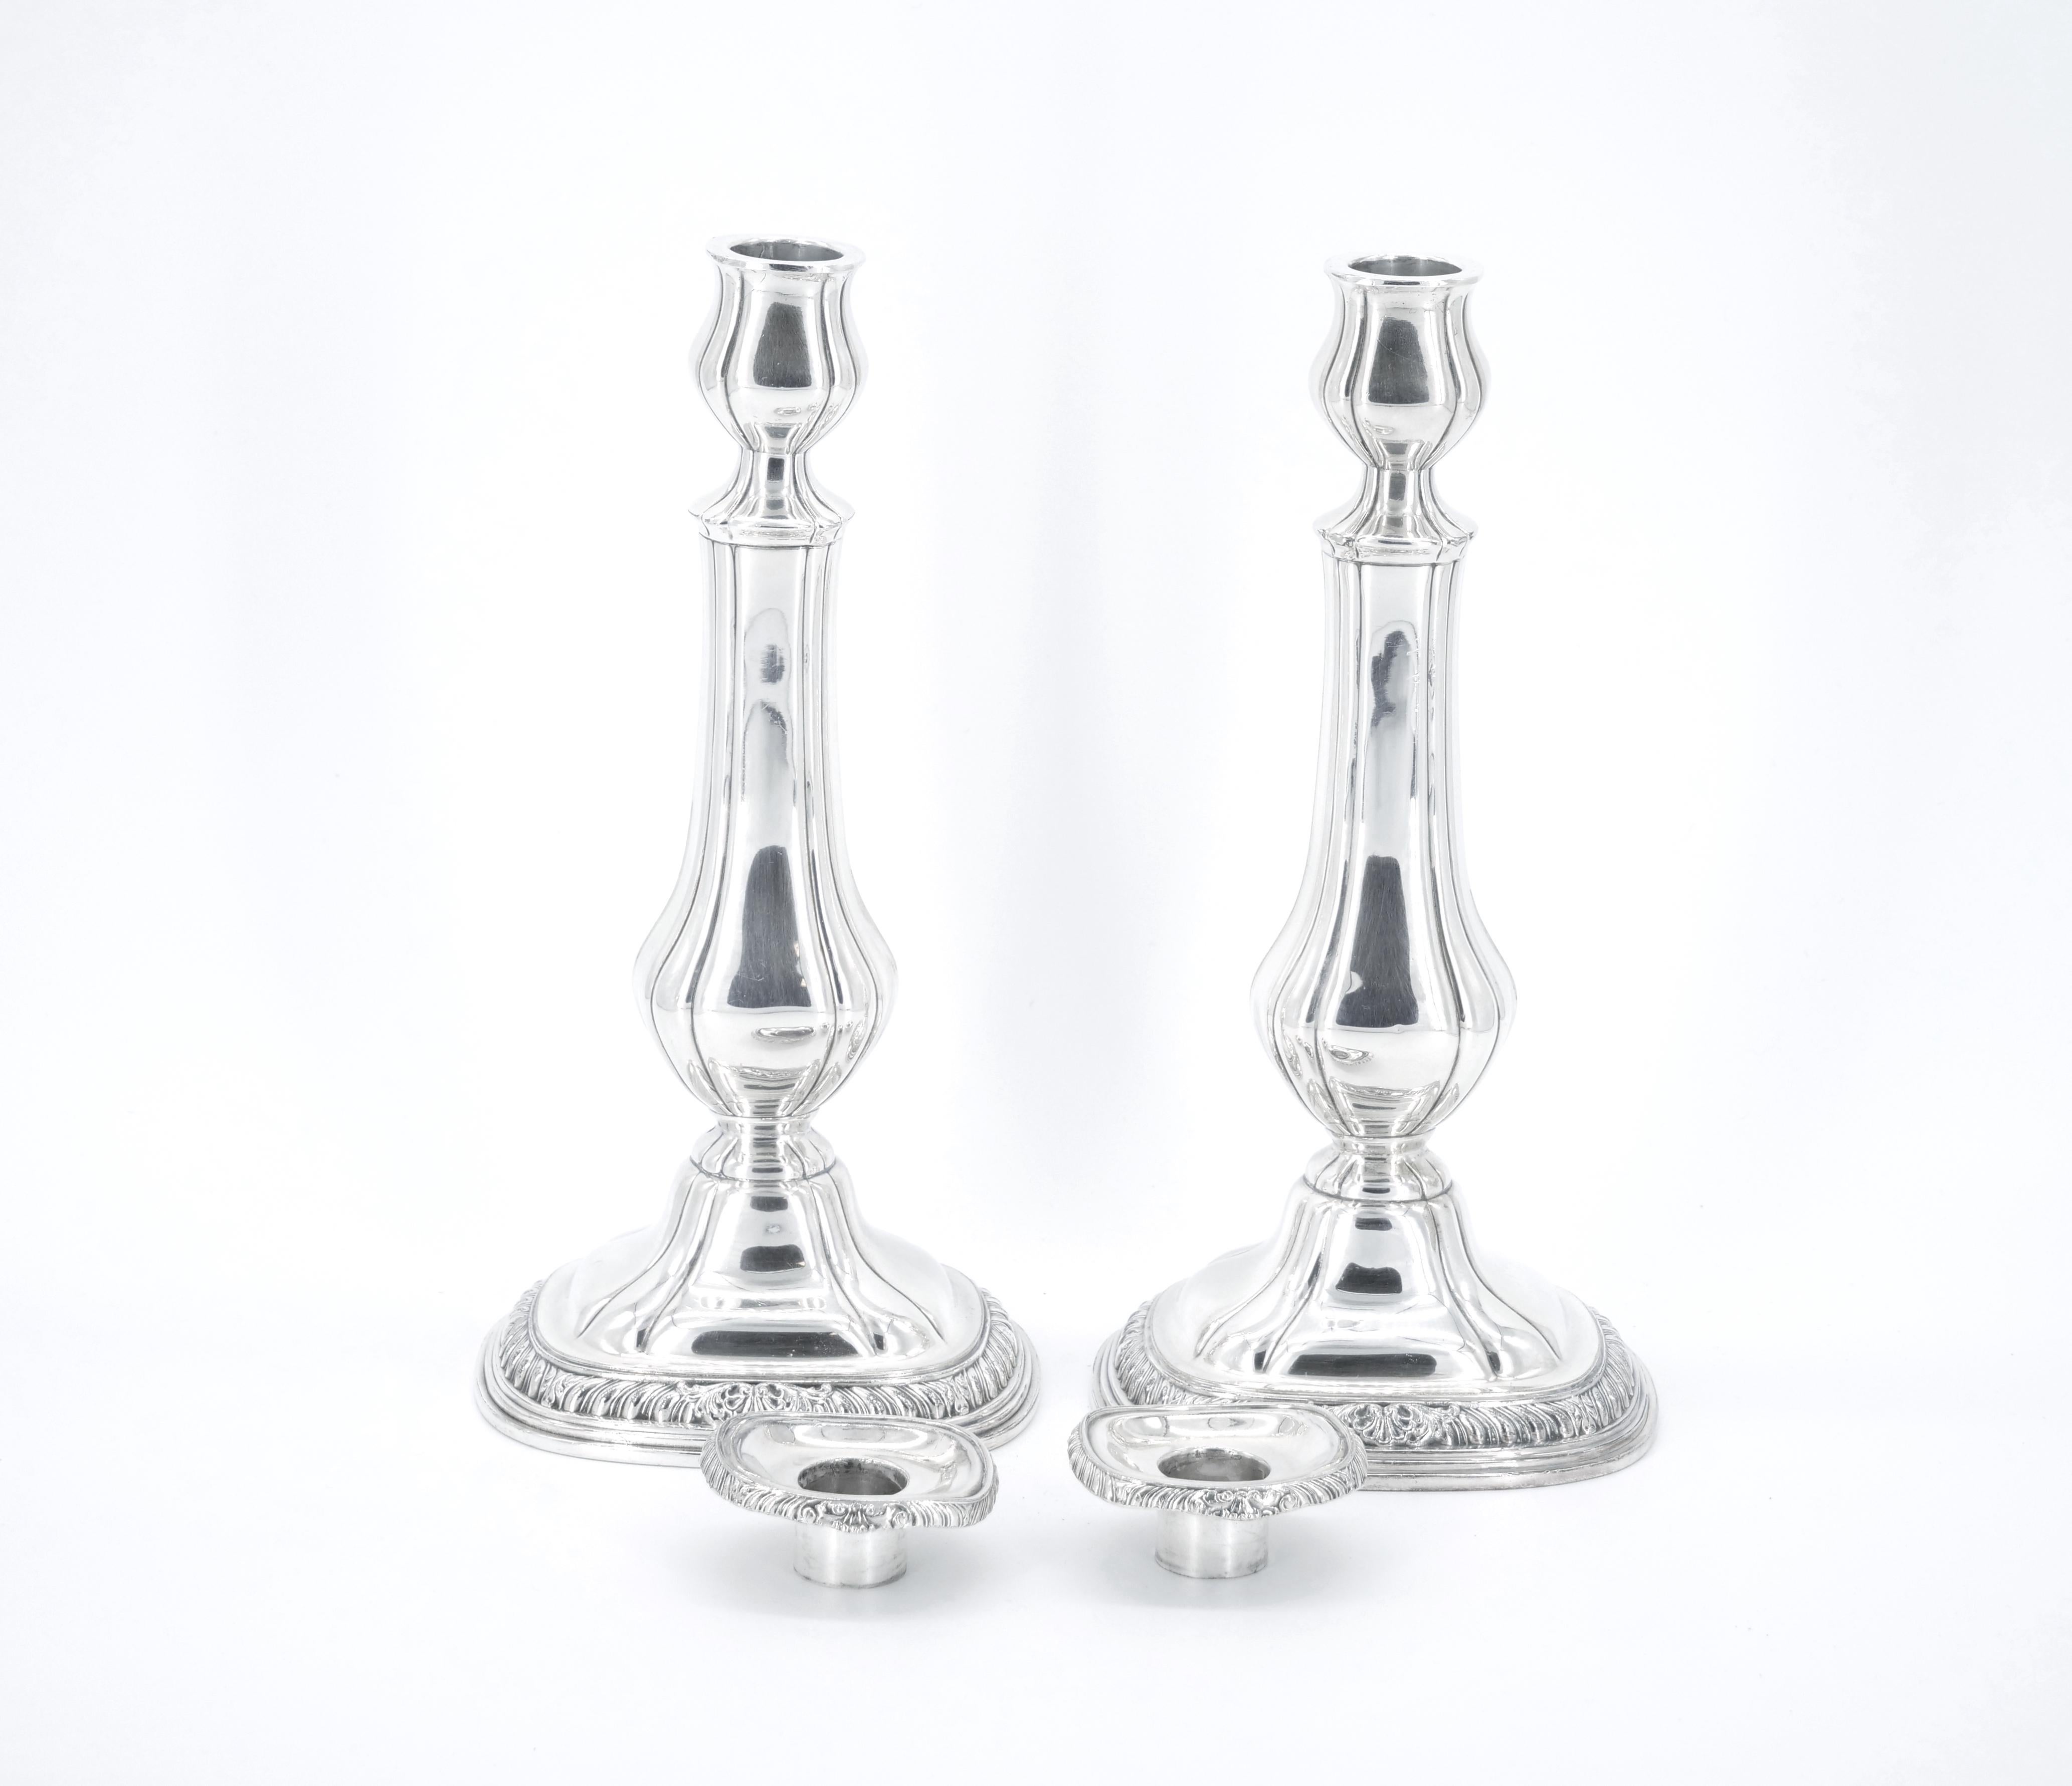 Pair Gorham Silverplate Candlesticks in the English Regency Style For Sale 3